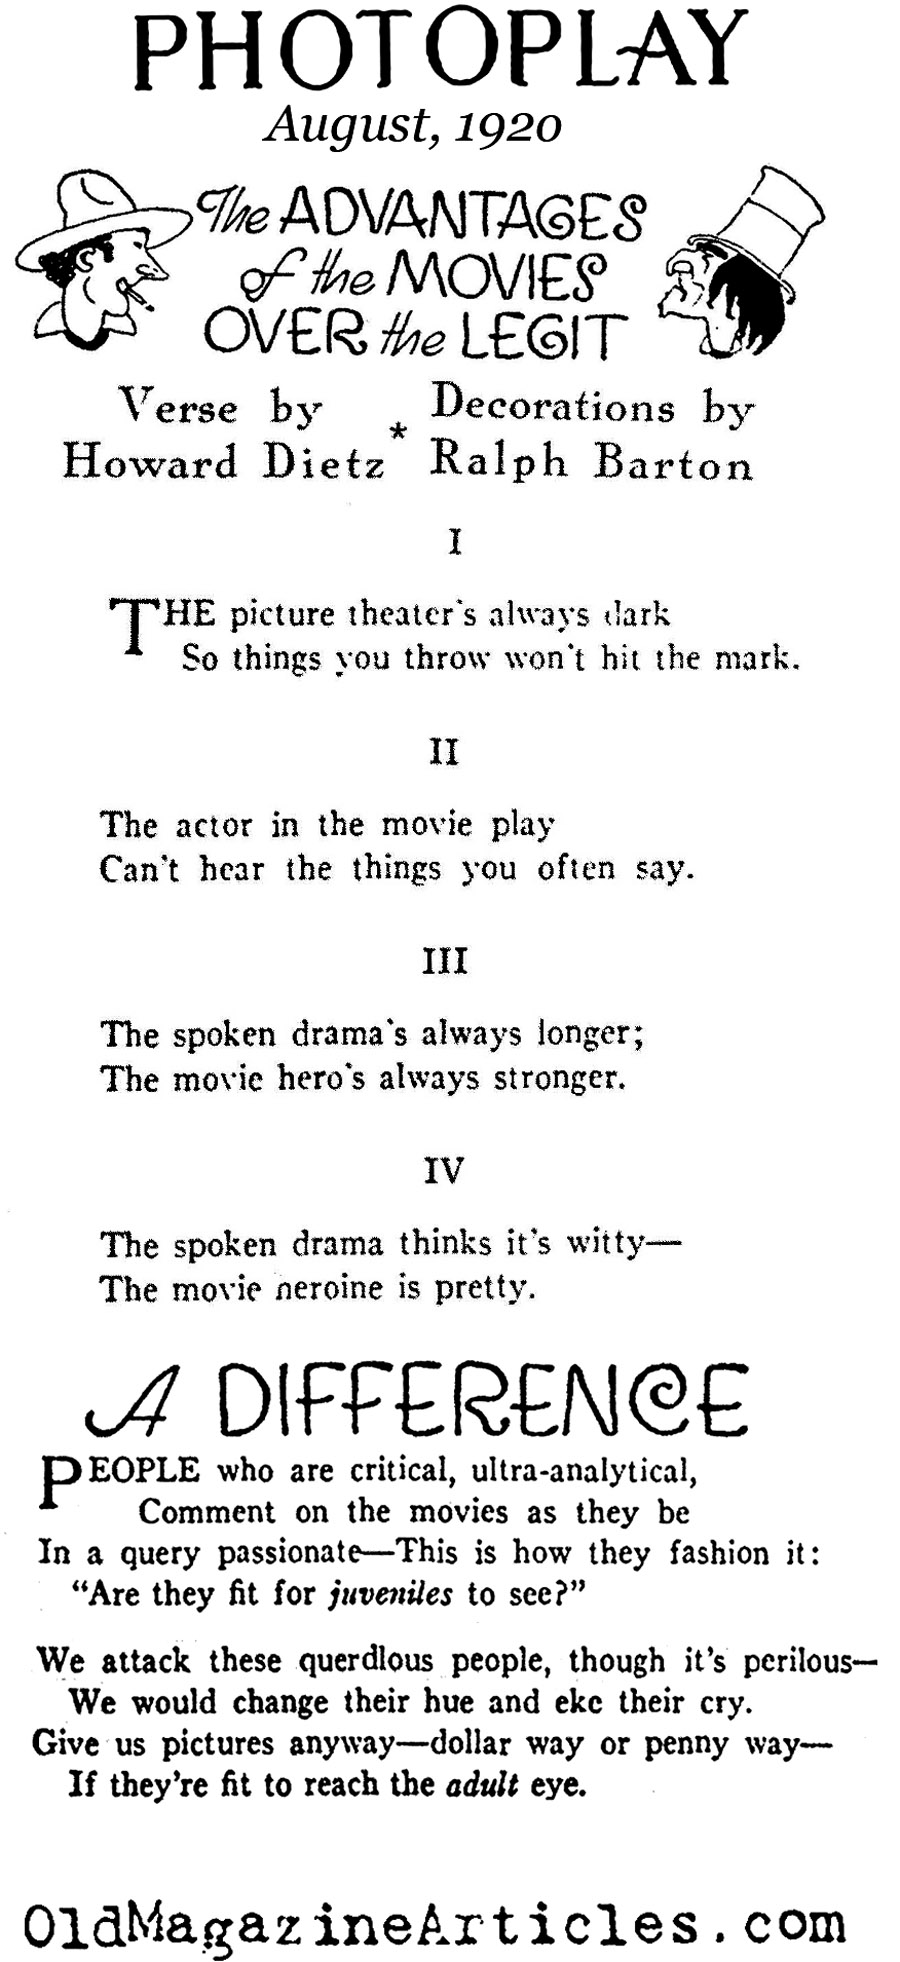 The Advantages of Silent Movies Over Theater (Photoplay Magazine, 1920)